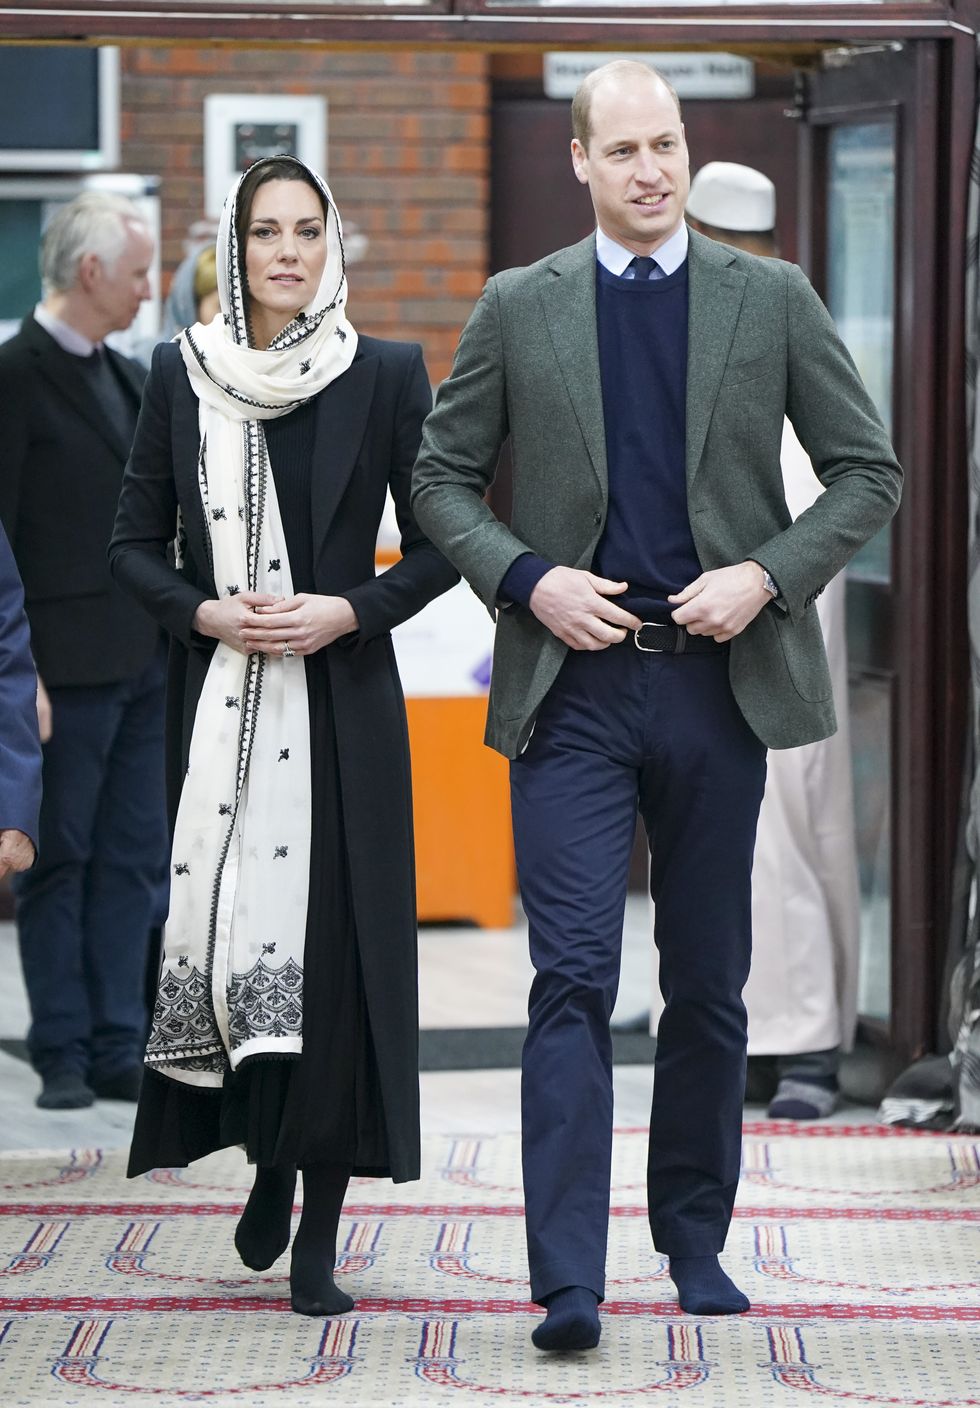 hayes, england march 09 catherine, princess of wales and prince william, prince of wales visit hayes muslim centre on march 9, 2023 in hayes, england the prince and princess of wales visited hayes muslim centre and thanked those involved in the aid effort and those who have fundraised to help communities affected by the devastating earthquakes in turkey and syria photo by arthur edwards wpa poolgetty images